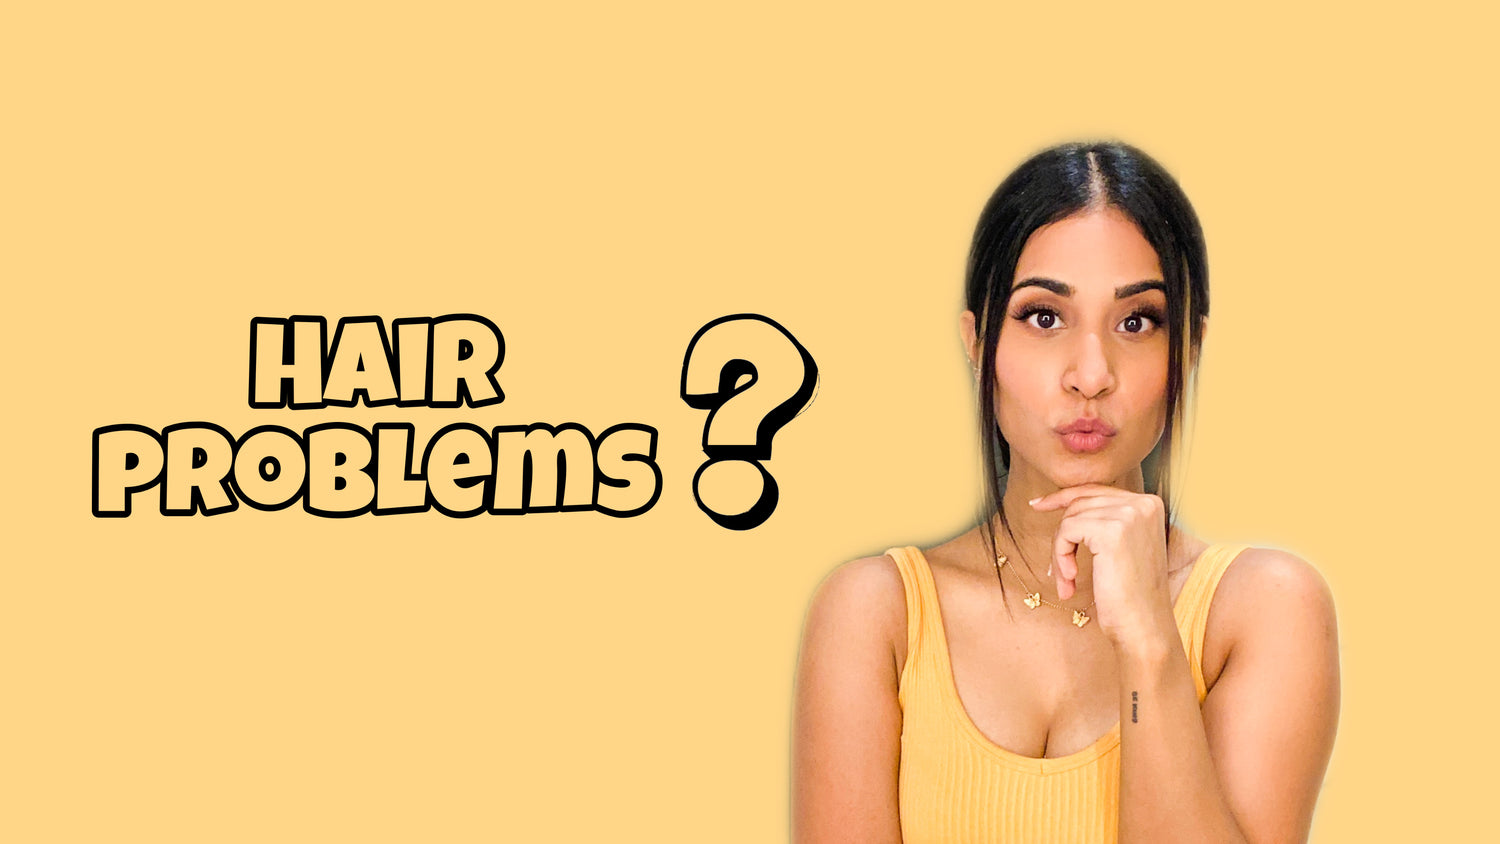 Hair Problems? Hair Extensions Come To Save The Day - 1 Hair Stop